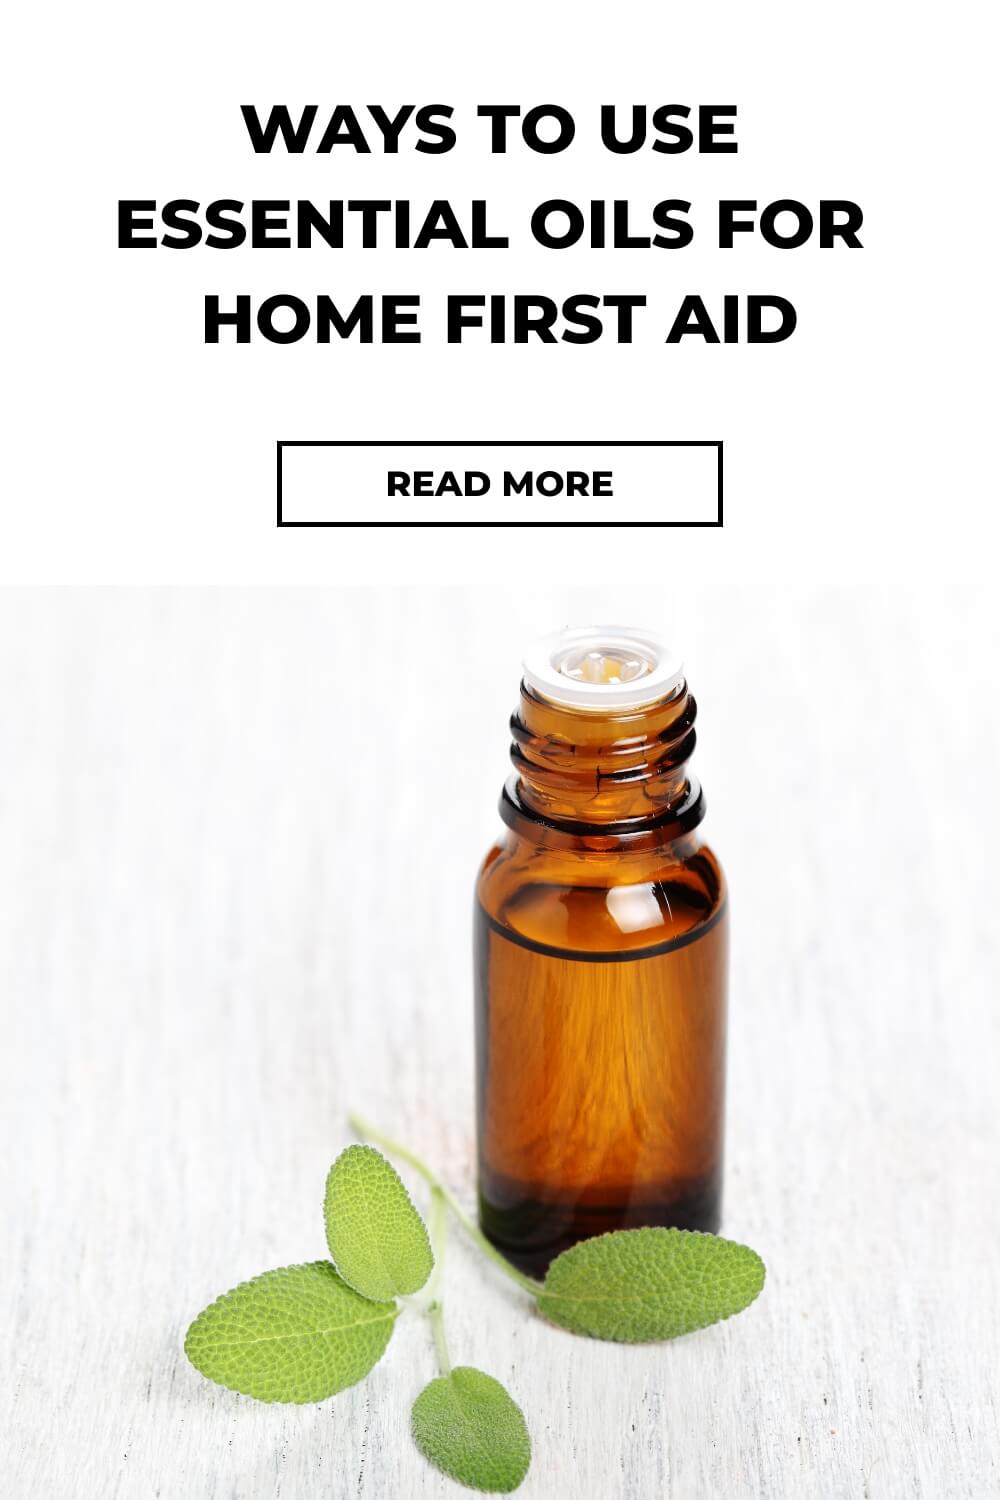 Ways to Use Essential-Oils for Home First Aid by Loving Essential Oils